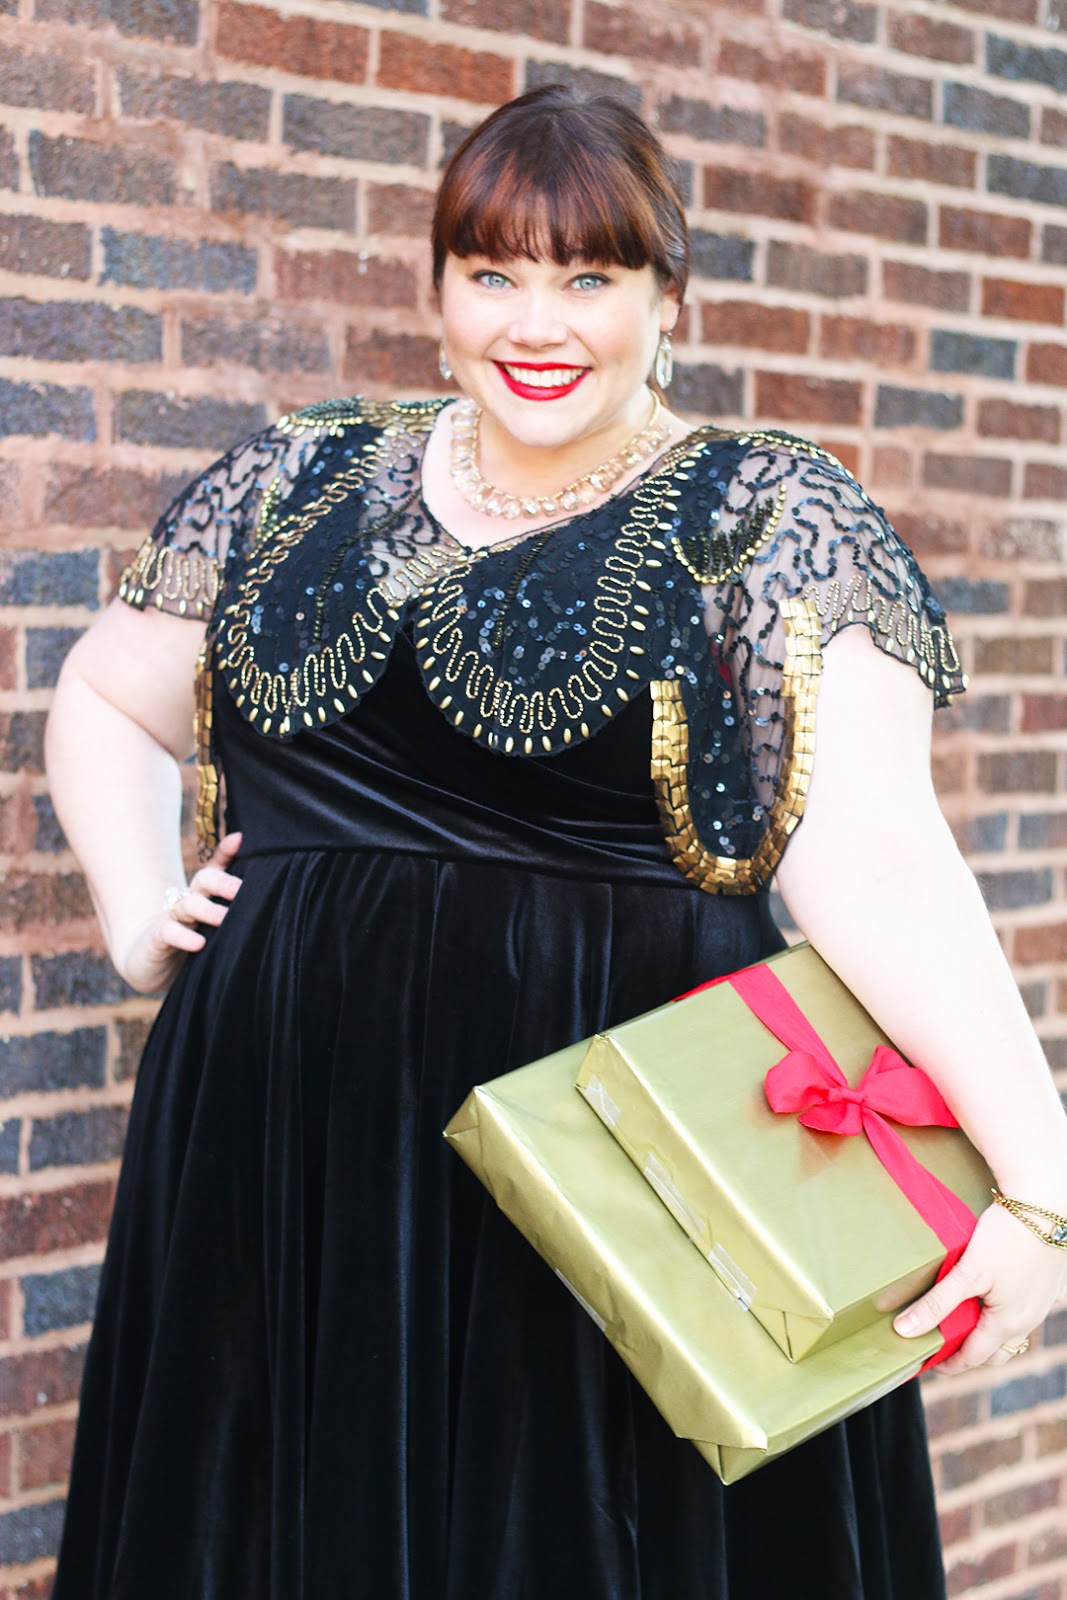 Plus Size Blogger Amber from Style Plus Curves in a Black Velvet Dress from Torrid, Holiday style, plus size style